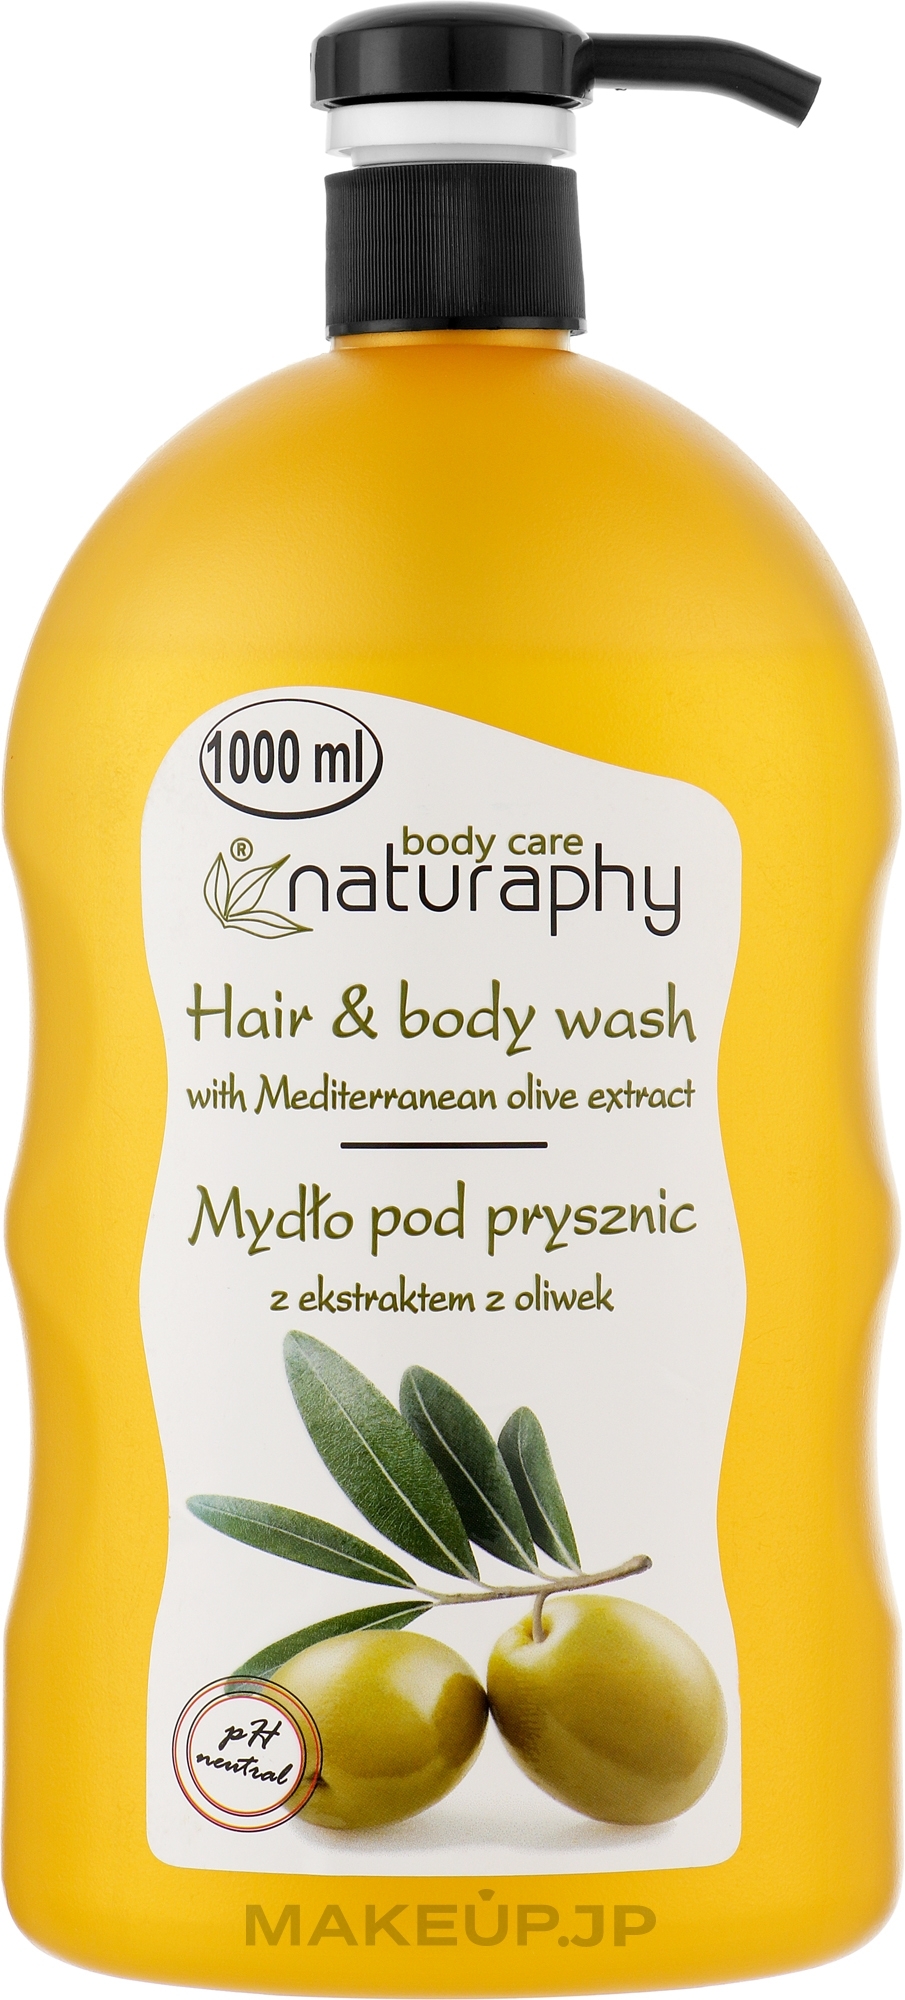 Shampoo-Shower Gel with Olive Extract - BluxCosmetics Naturaphy Olive Oil Hair & Body Wash — photo 1000 ml